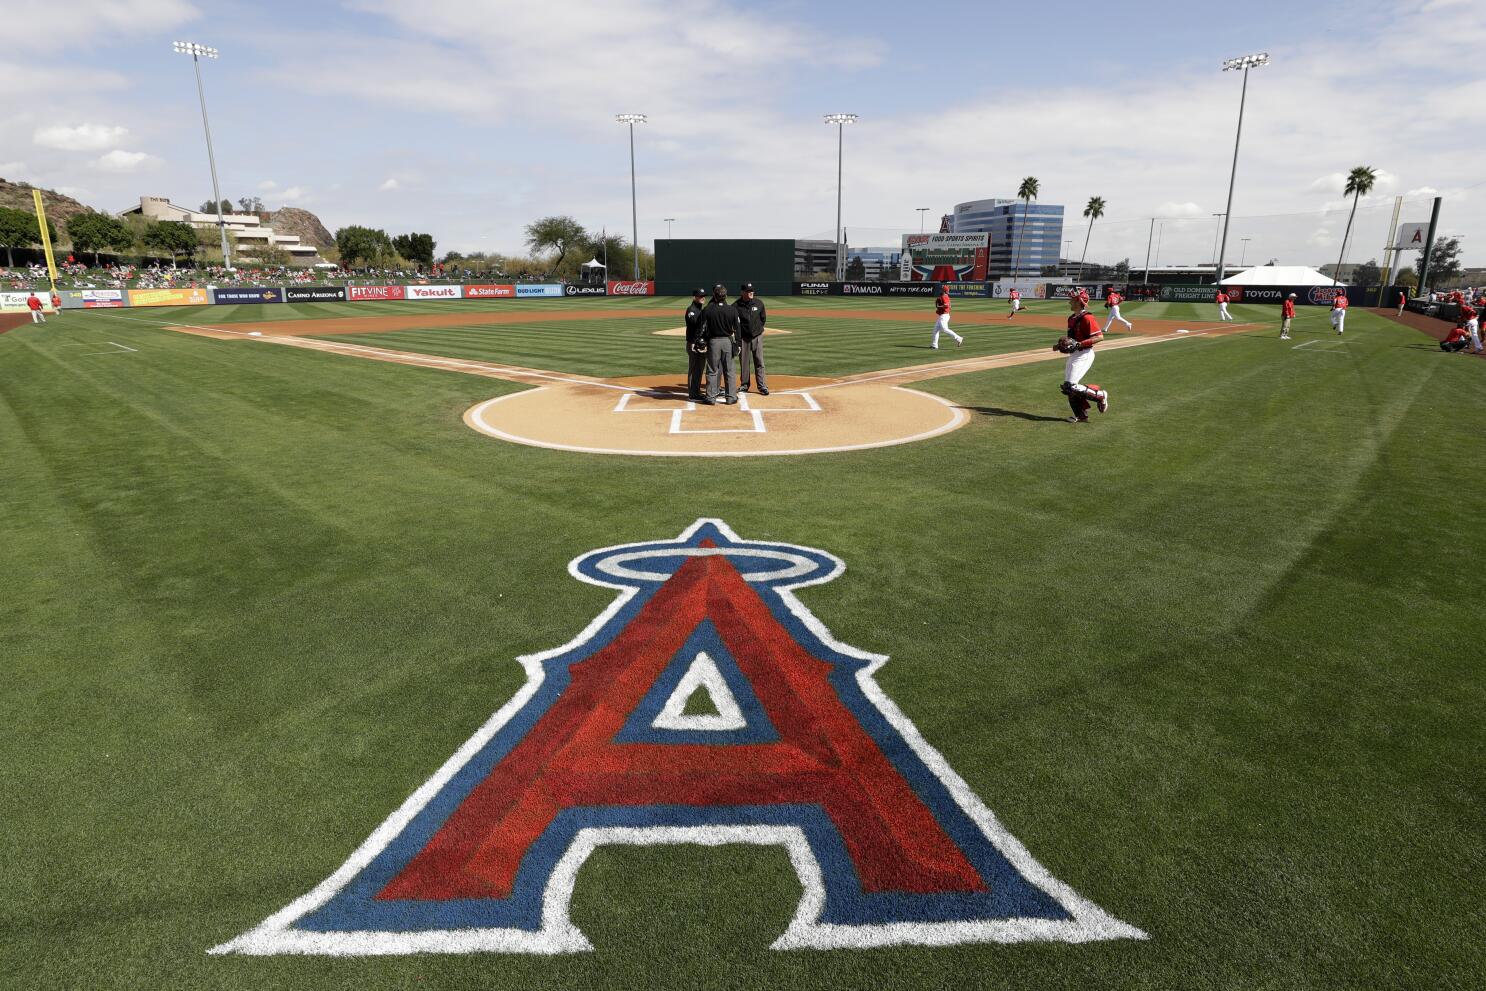 Prospects Jo Adell and Brandon Marsh help Angels win exhibition